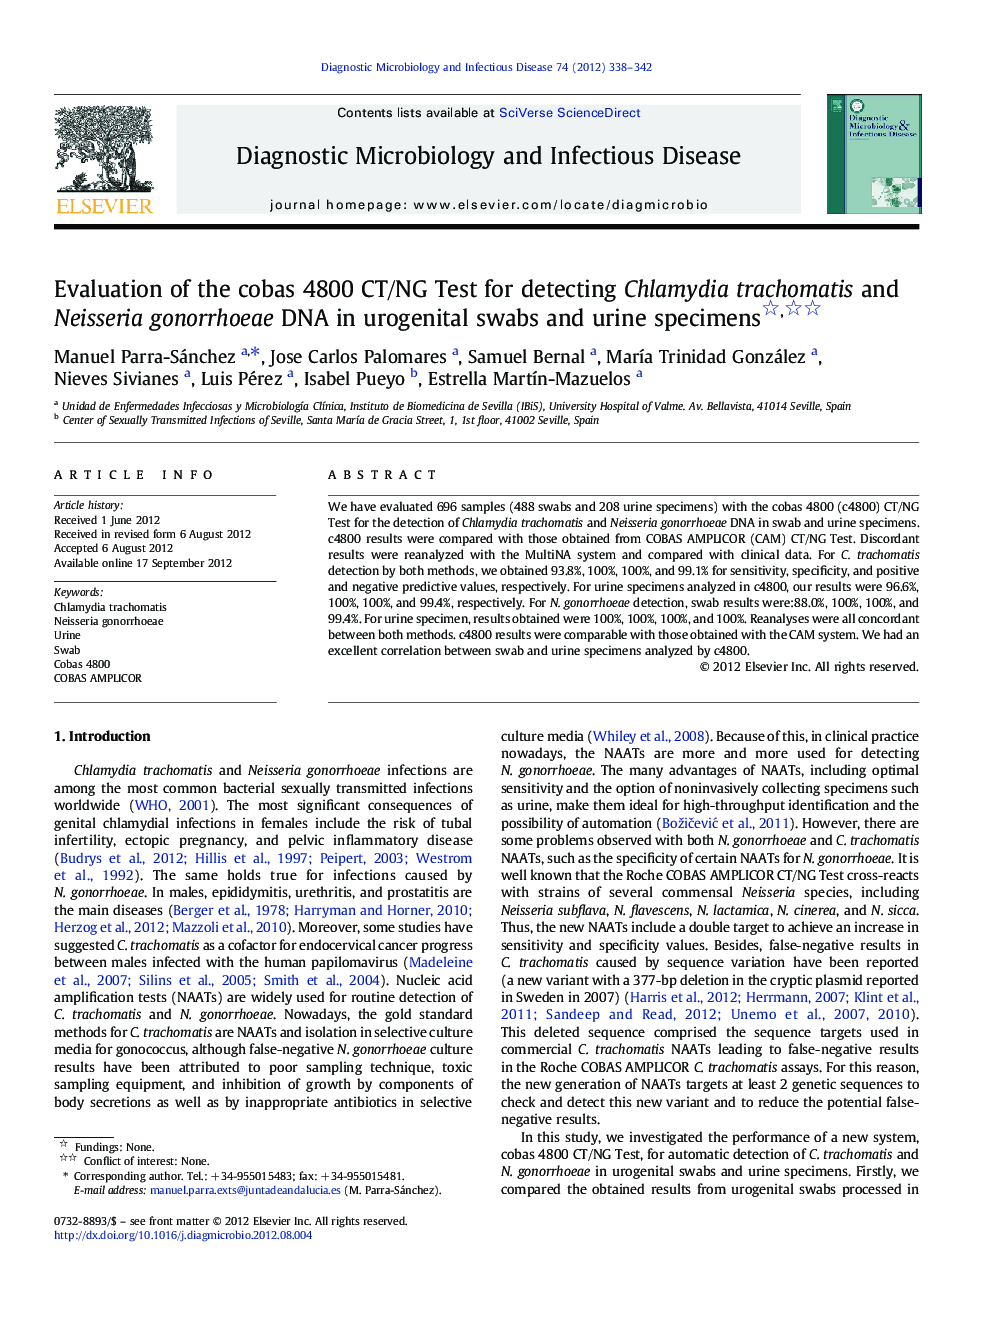 Evaluation of the cobas 4800 CT/NG Test for detecting Chlamydia trachomatis and Neisseria gonorrhoeae DNA in urogenital swabs and urine specimens